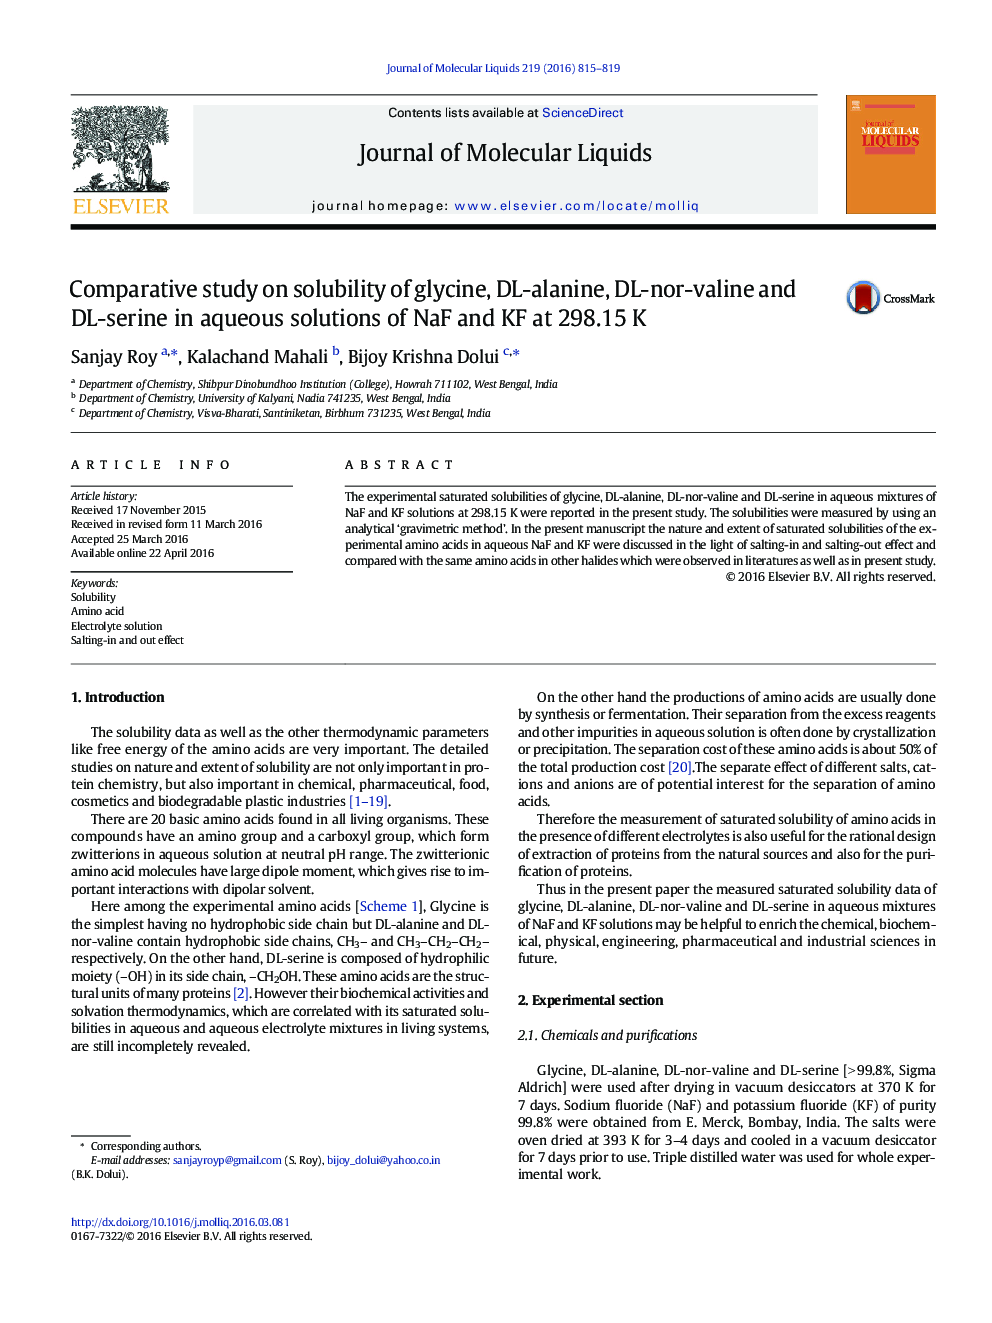 Comparative study on solubility of glycine, DL-alanine, DL-nor-valine and DL-serine in aqueous solutions of NaF and KF at 298.15Â K